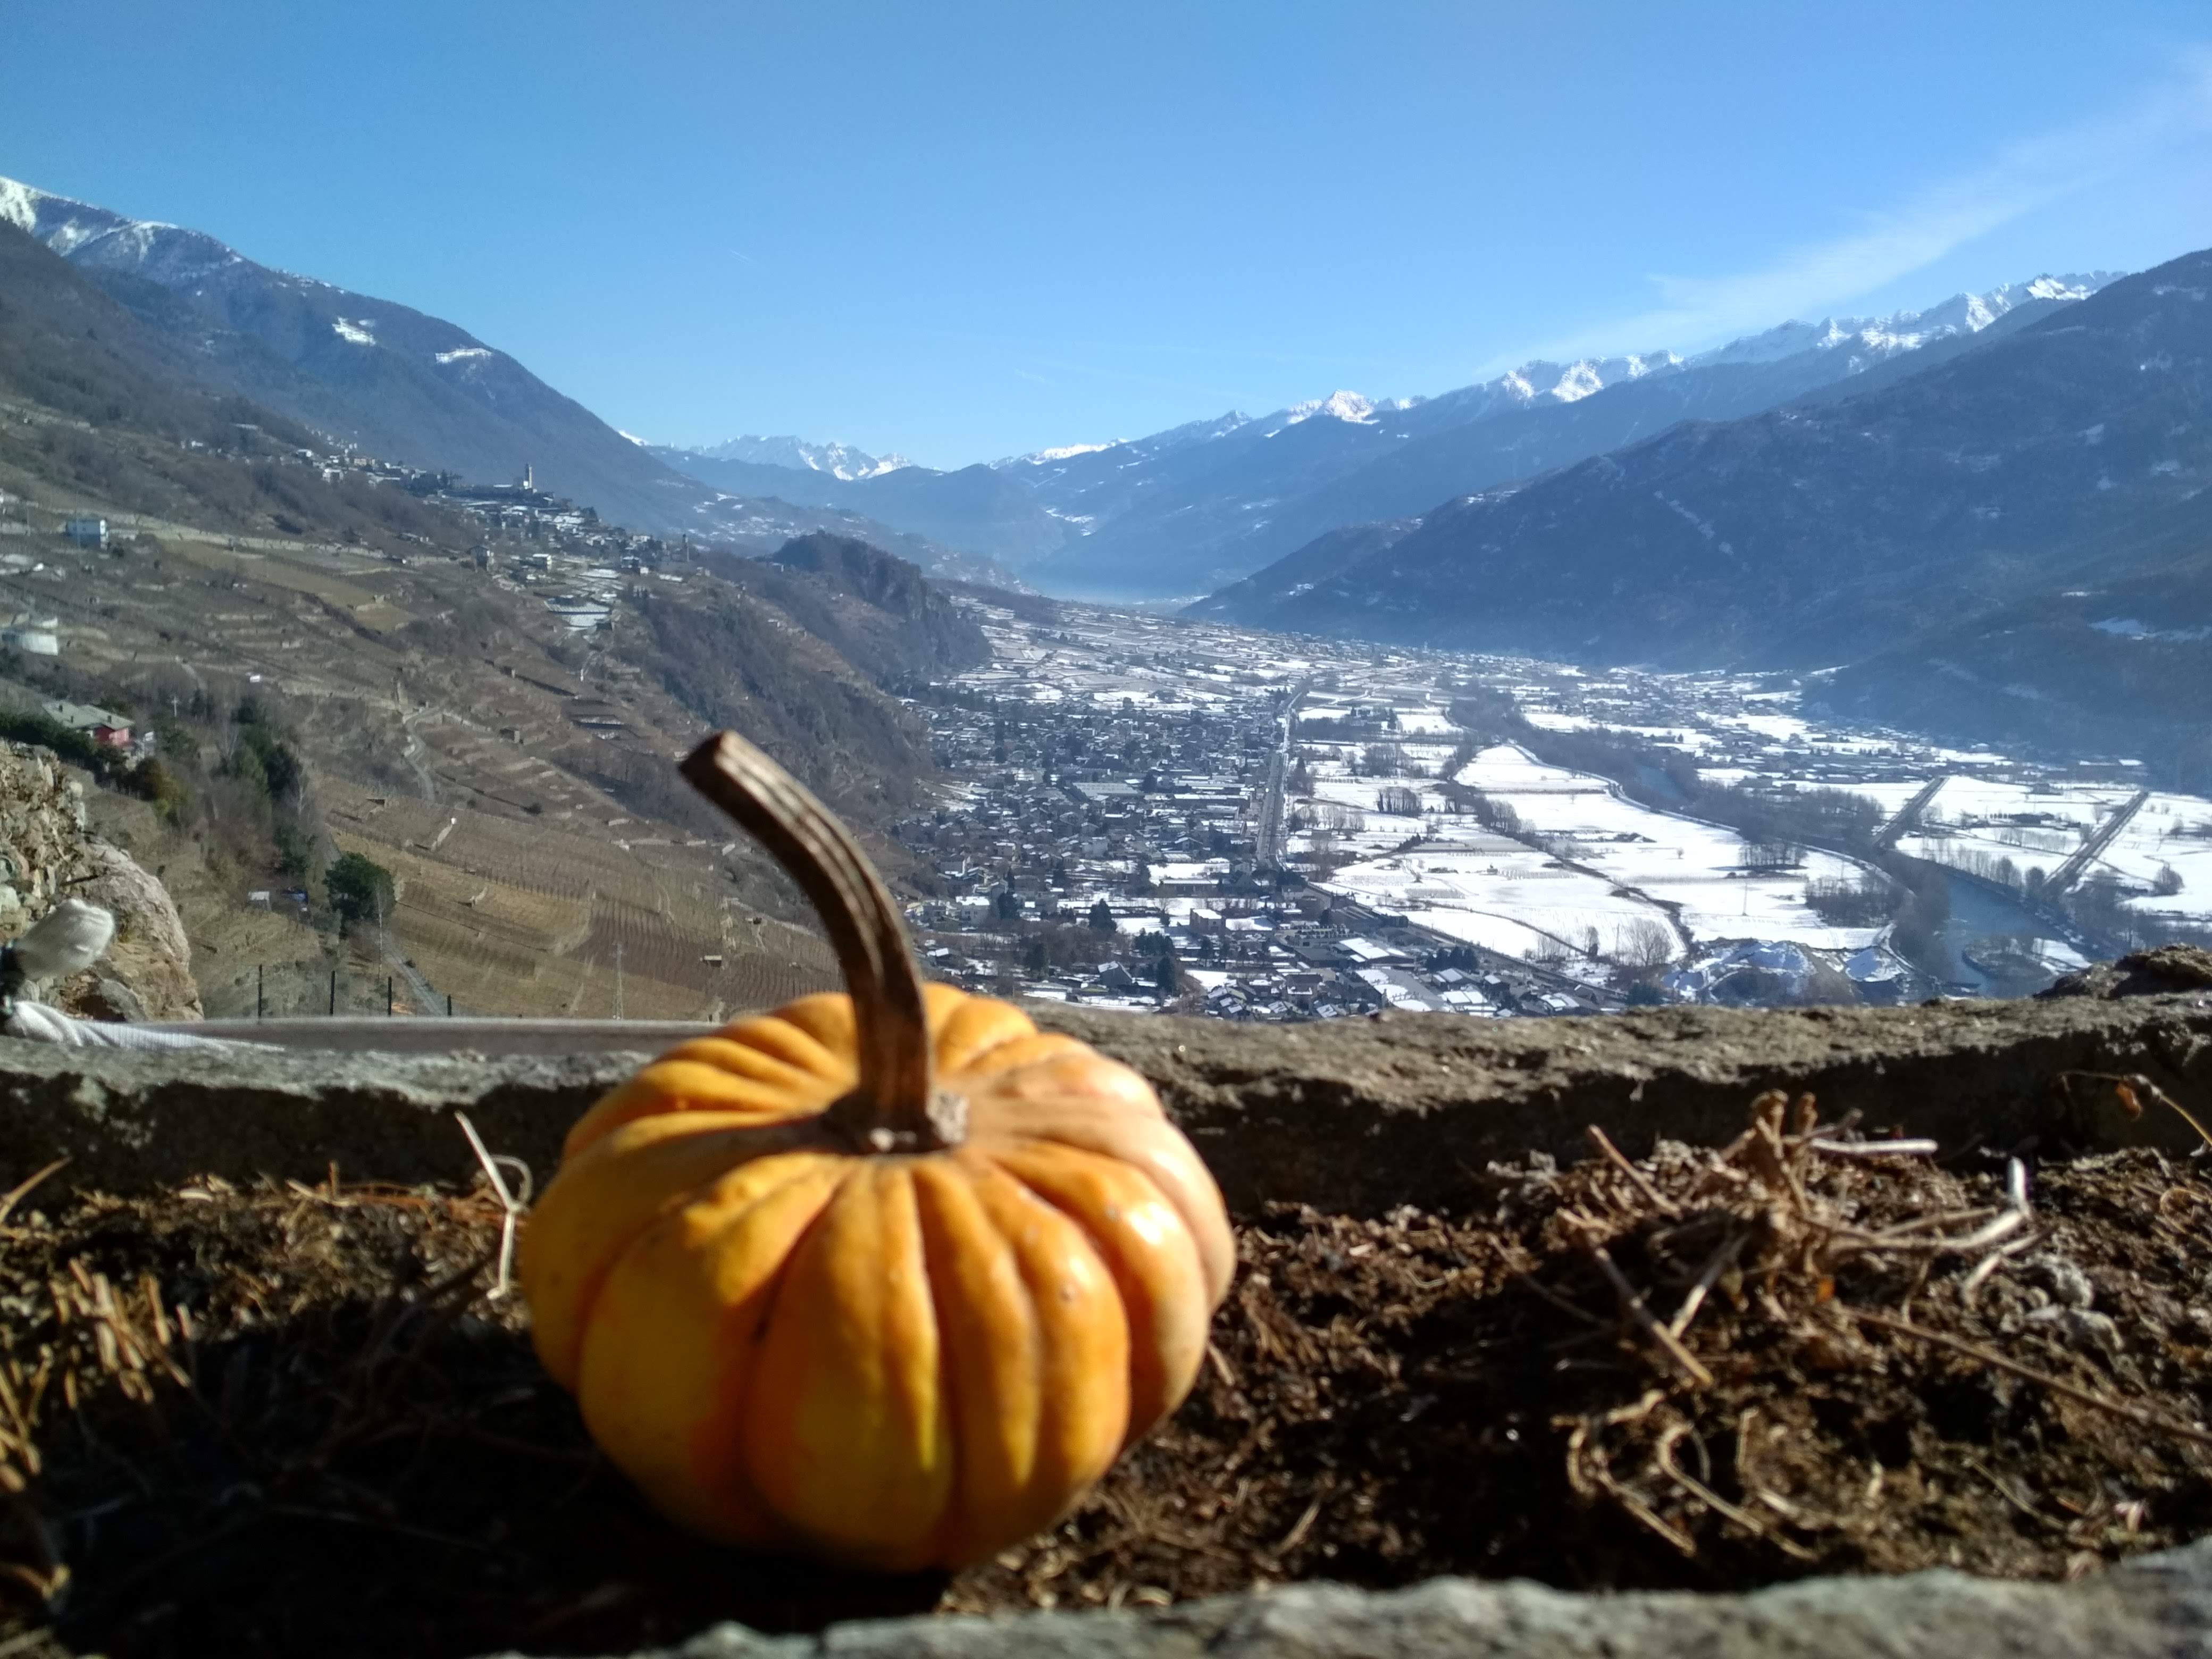 panoramas of the Valtellina - landscape with pumpkin in the foreground